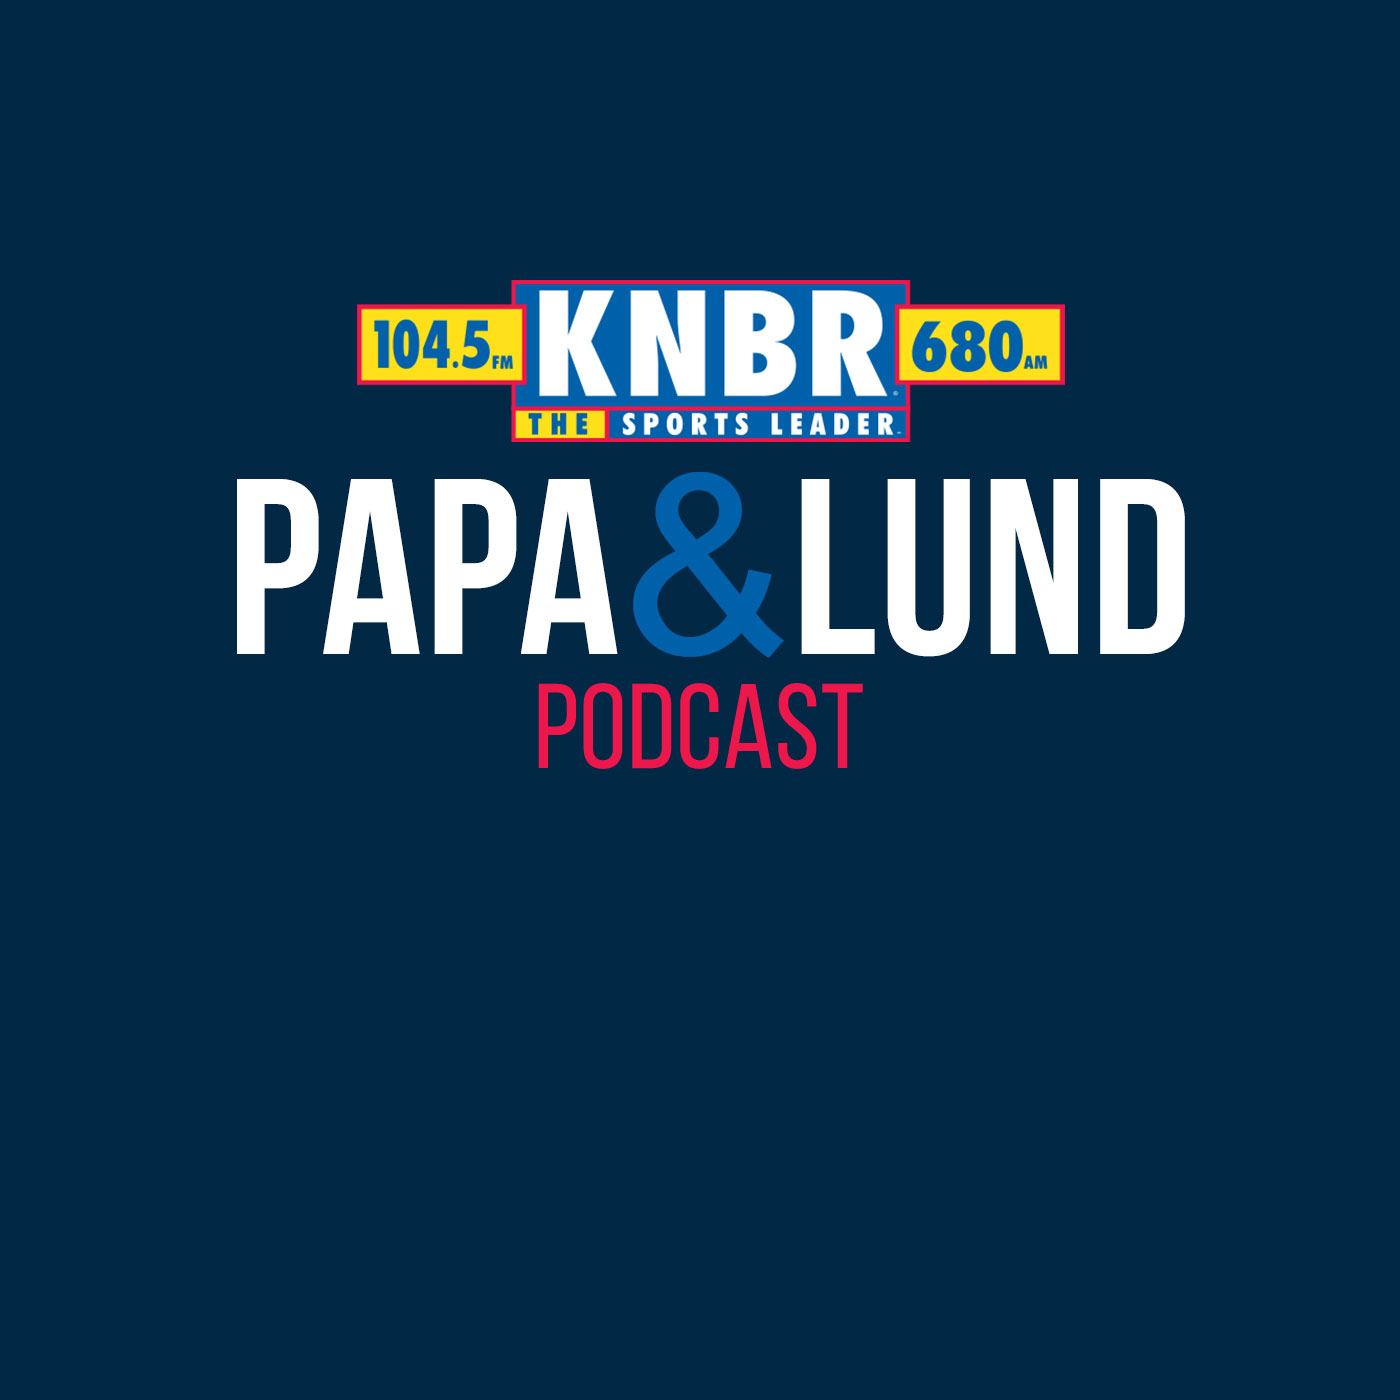 3-27 Javier Lopez joins Papa & Lund to discuss Sergio Romo's time as a Giant and being able to suit up for the Orange & Black one last time at Oracle Park